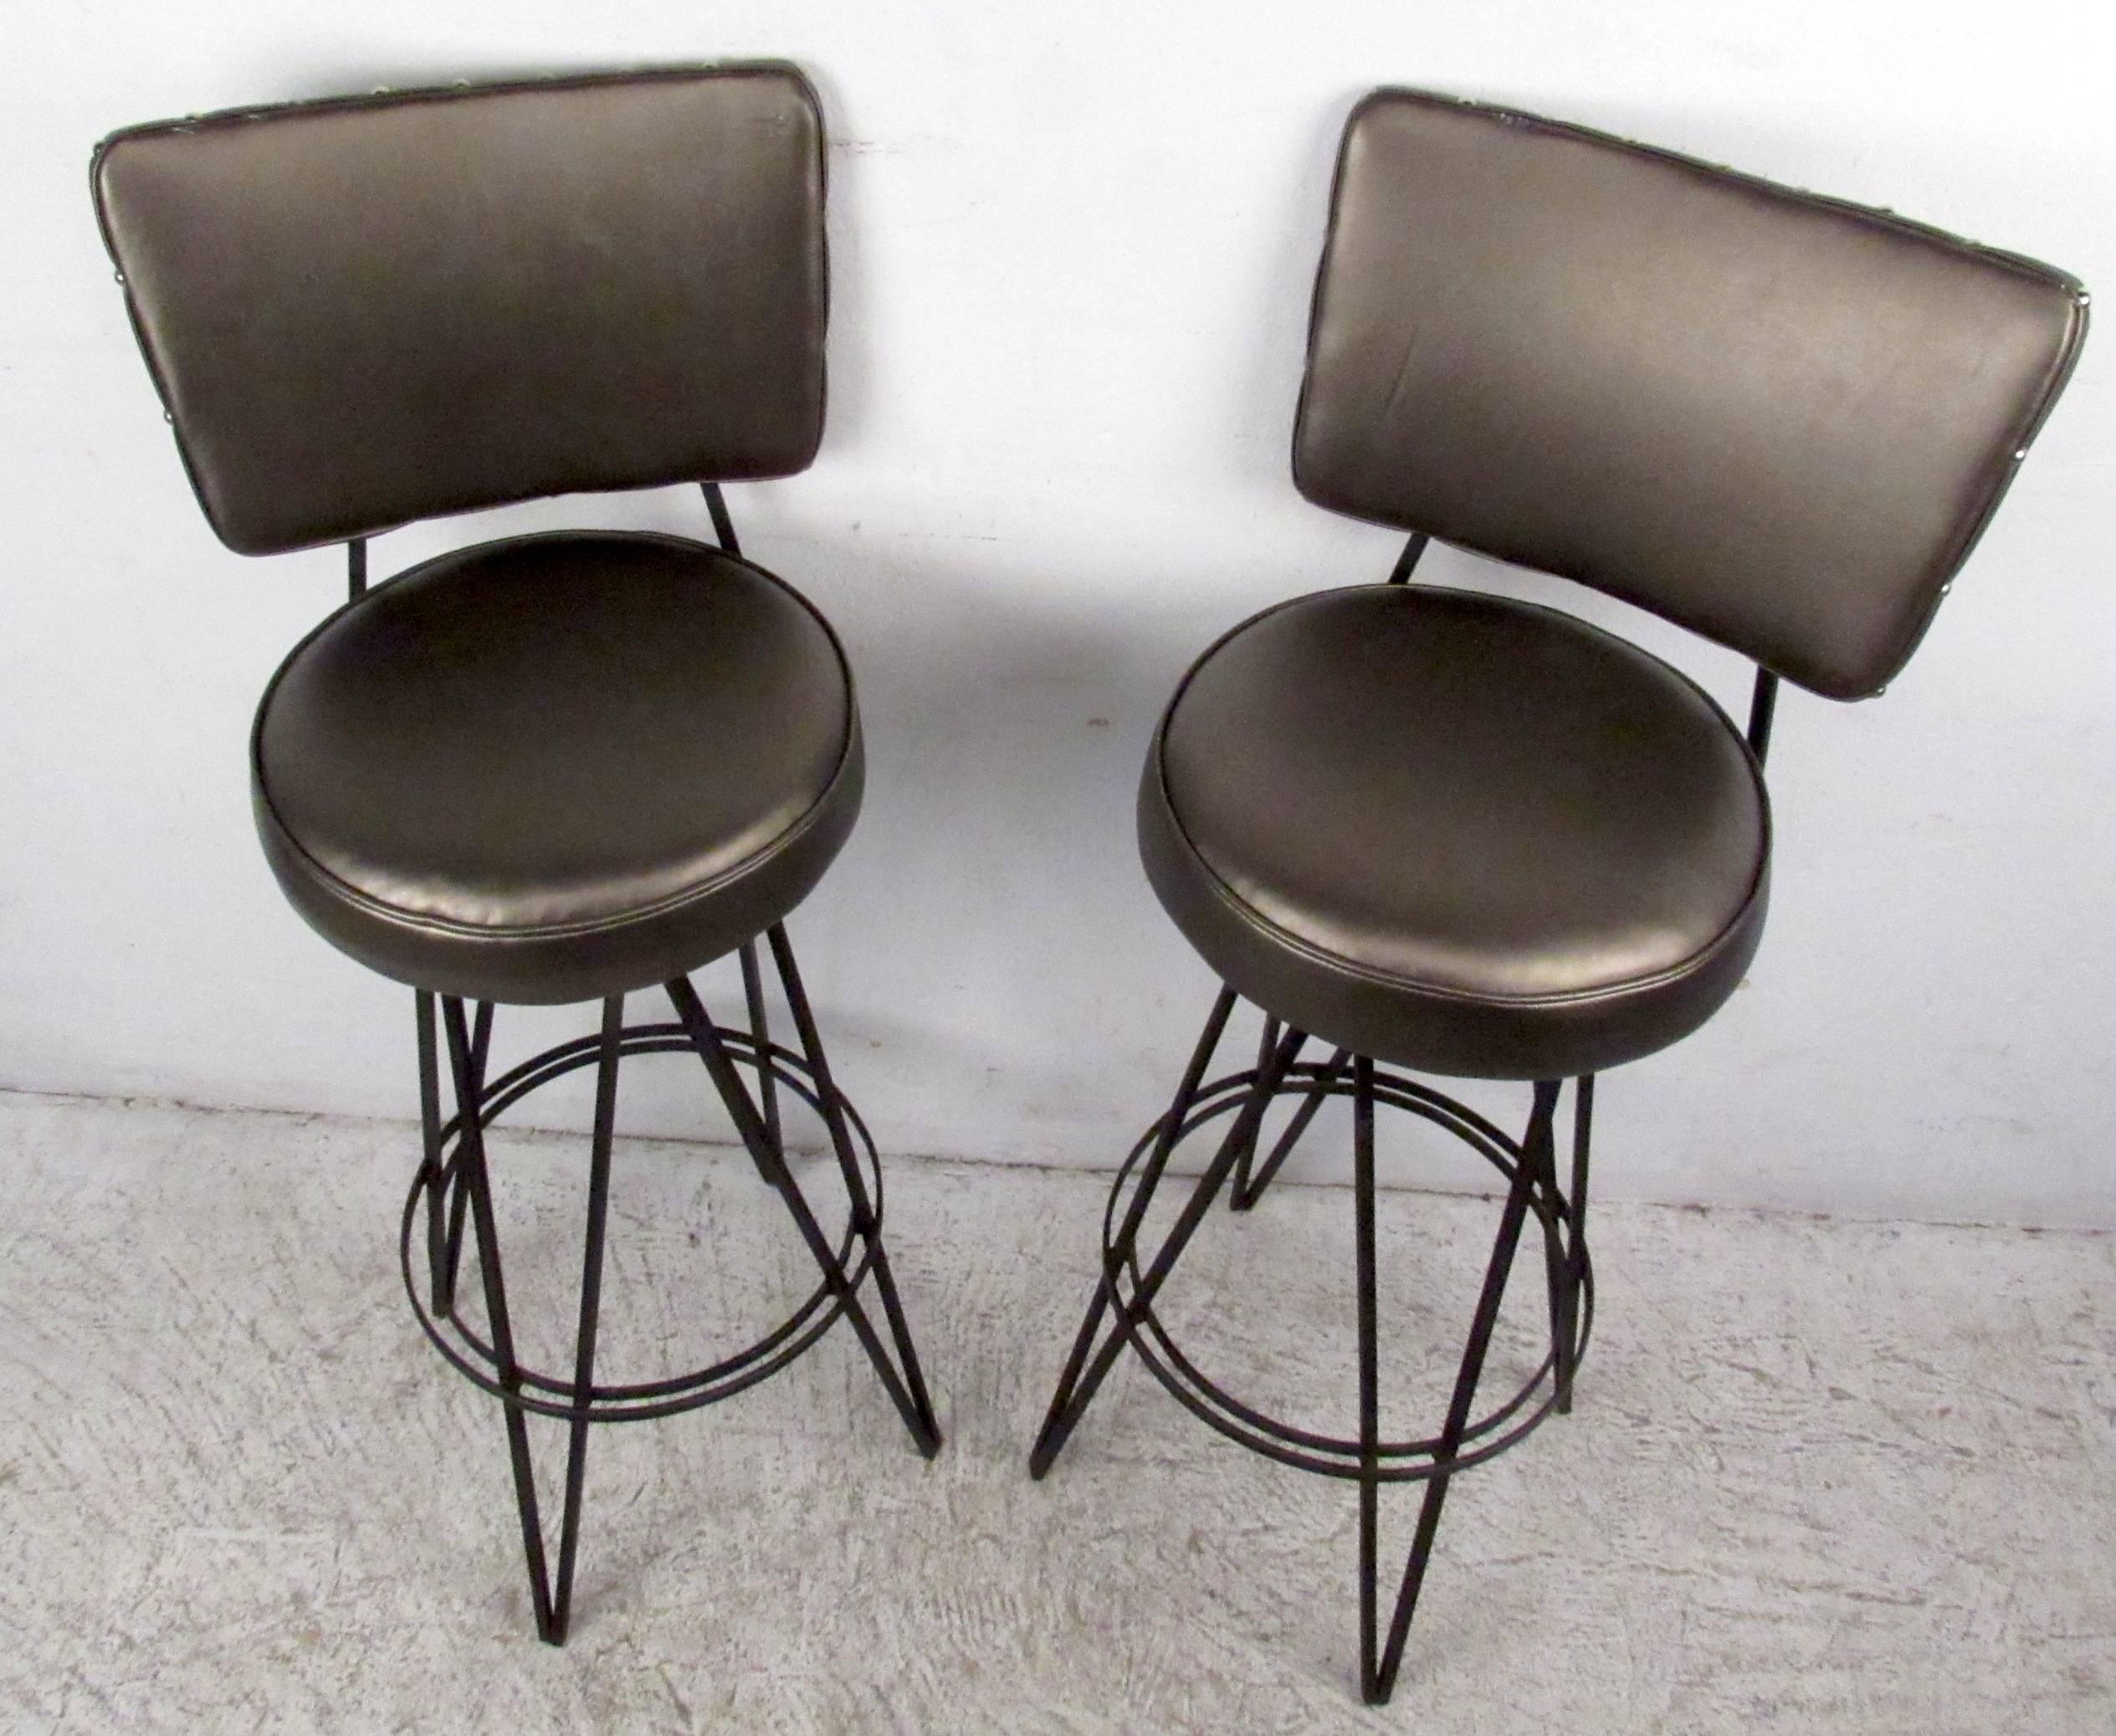 Two vintage modern hair pin iron stools with vinyl upholstery and swivel bases, designed in the manner of Frederick Weinberg.

Please confirm item location NY or NJ with dealer.